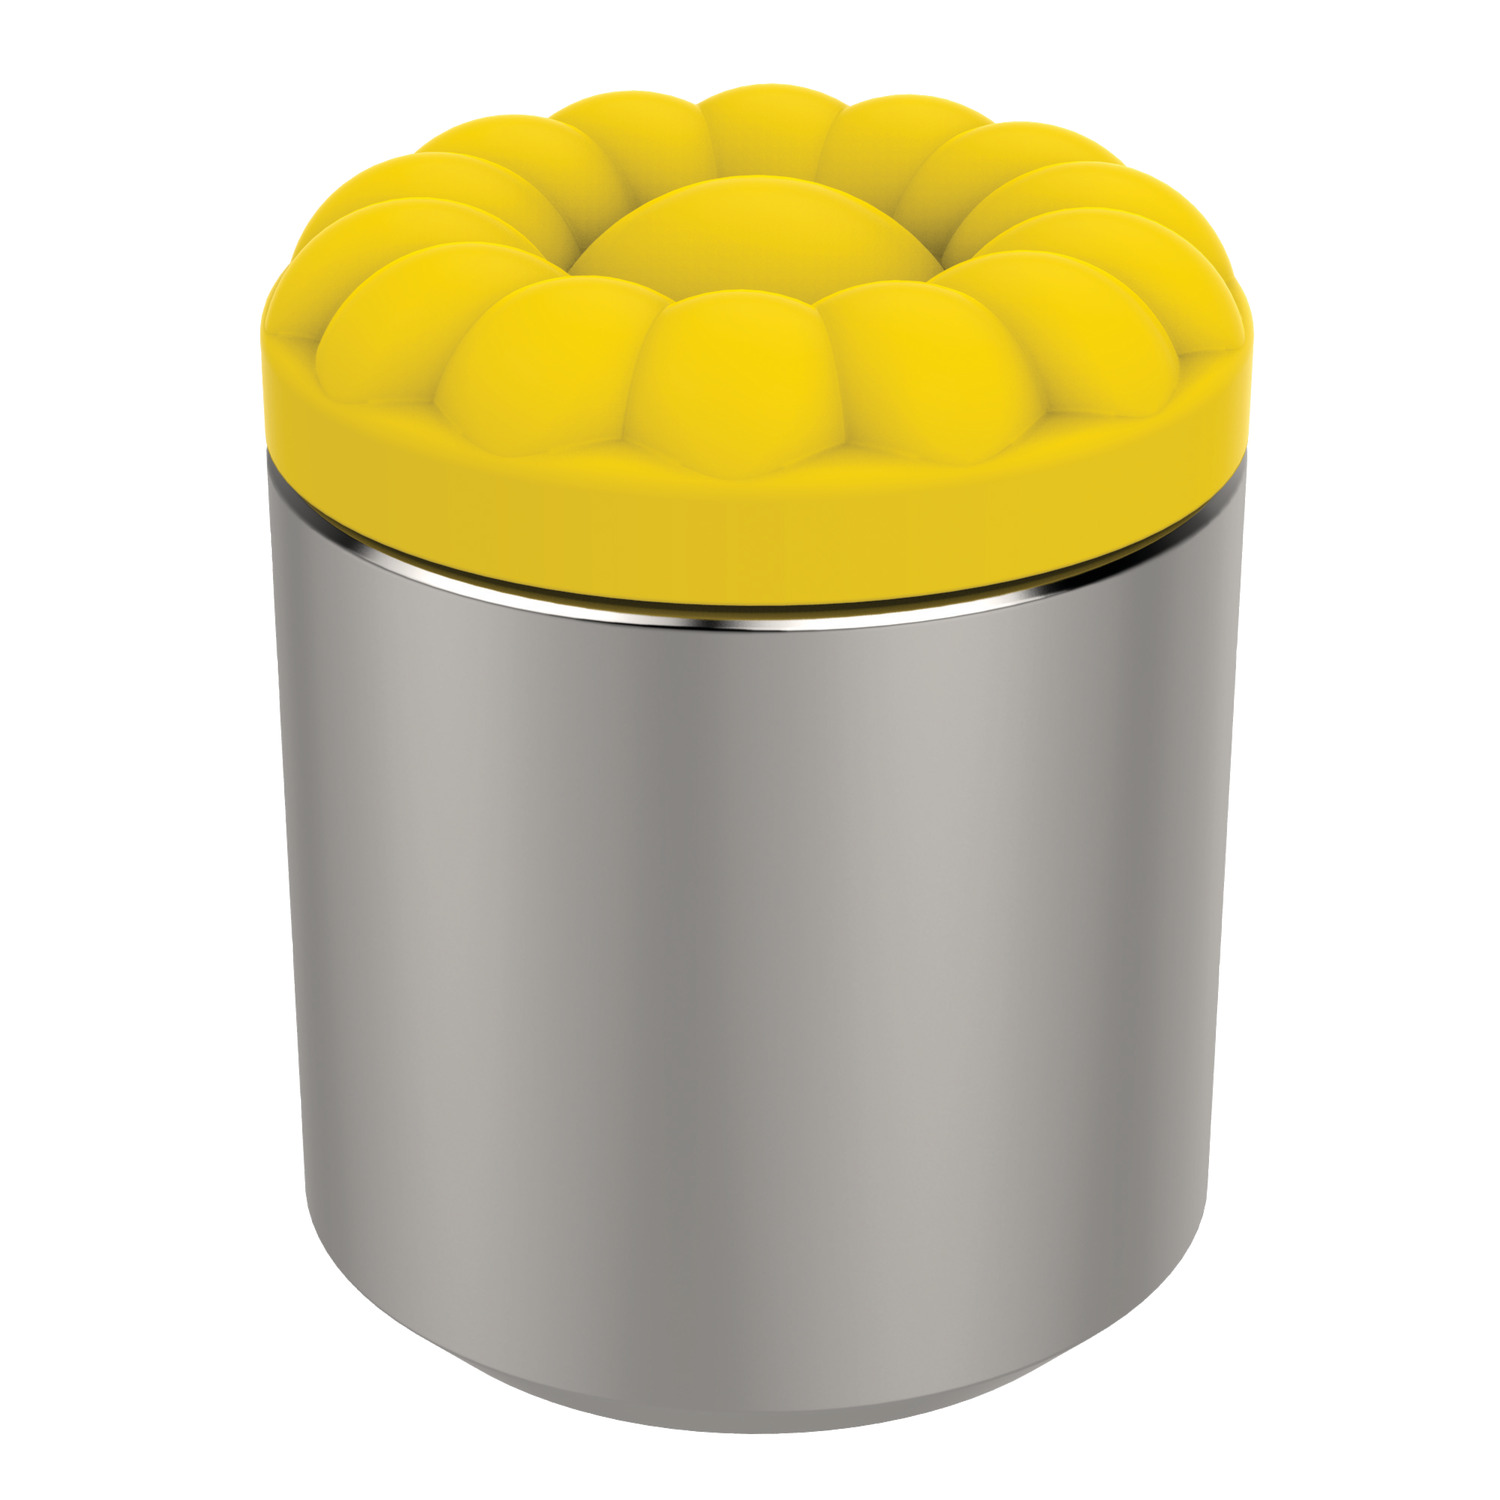 Urethane Coated Grippers Non-marking, non-staining Urethane pads permanently bonded to the stainless steel body. Bubbled texture of Urethane pad allows air to escape so avoiding any suction action.